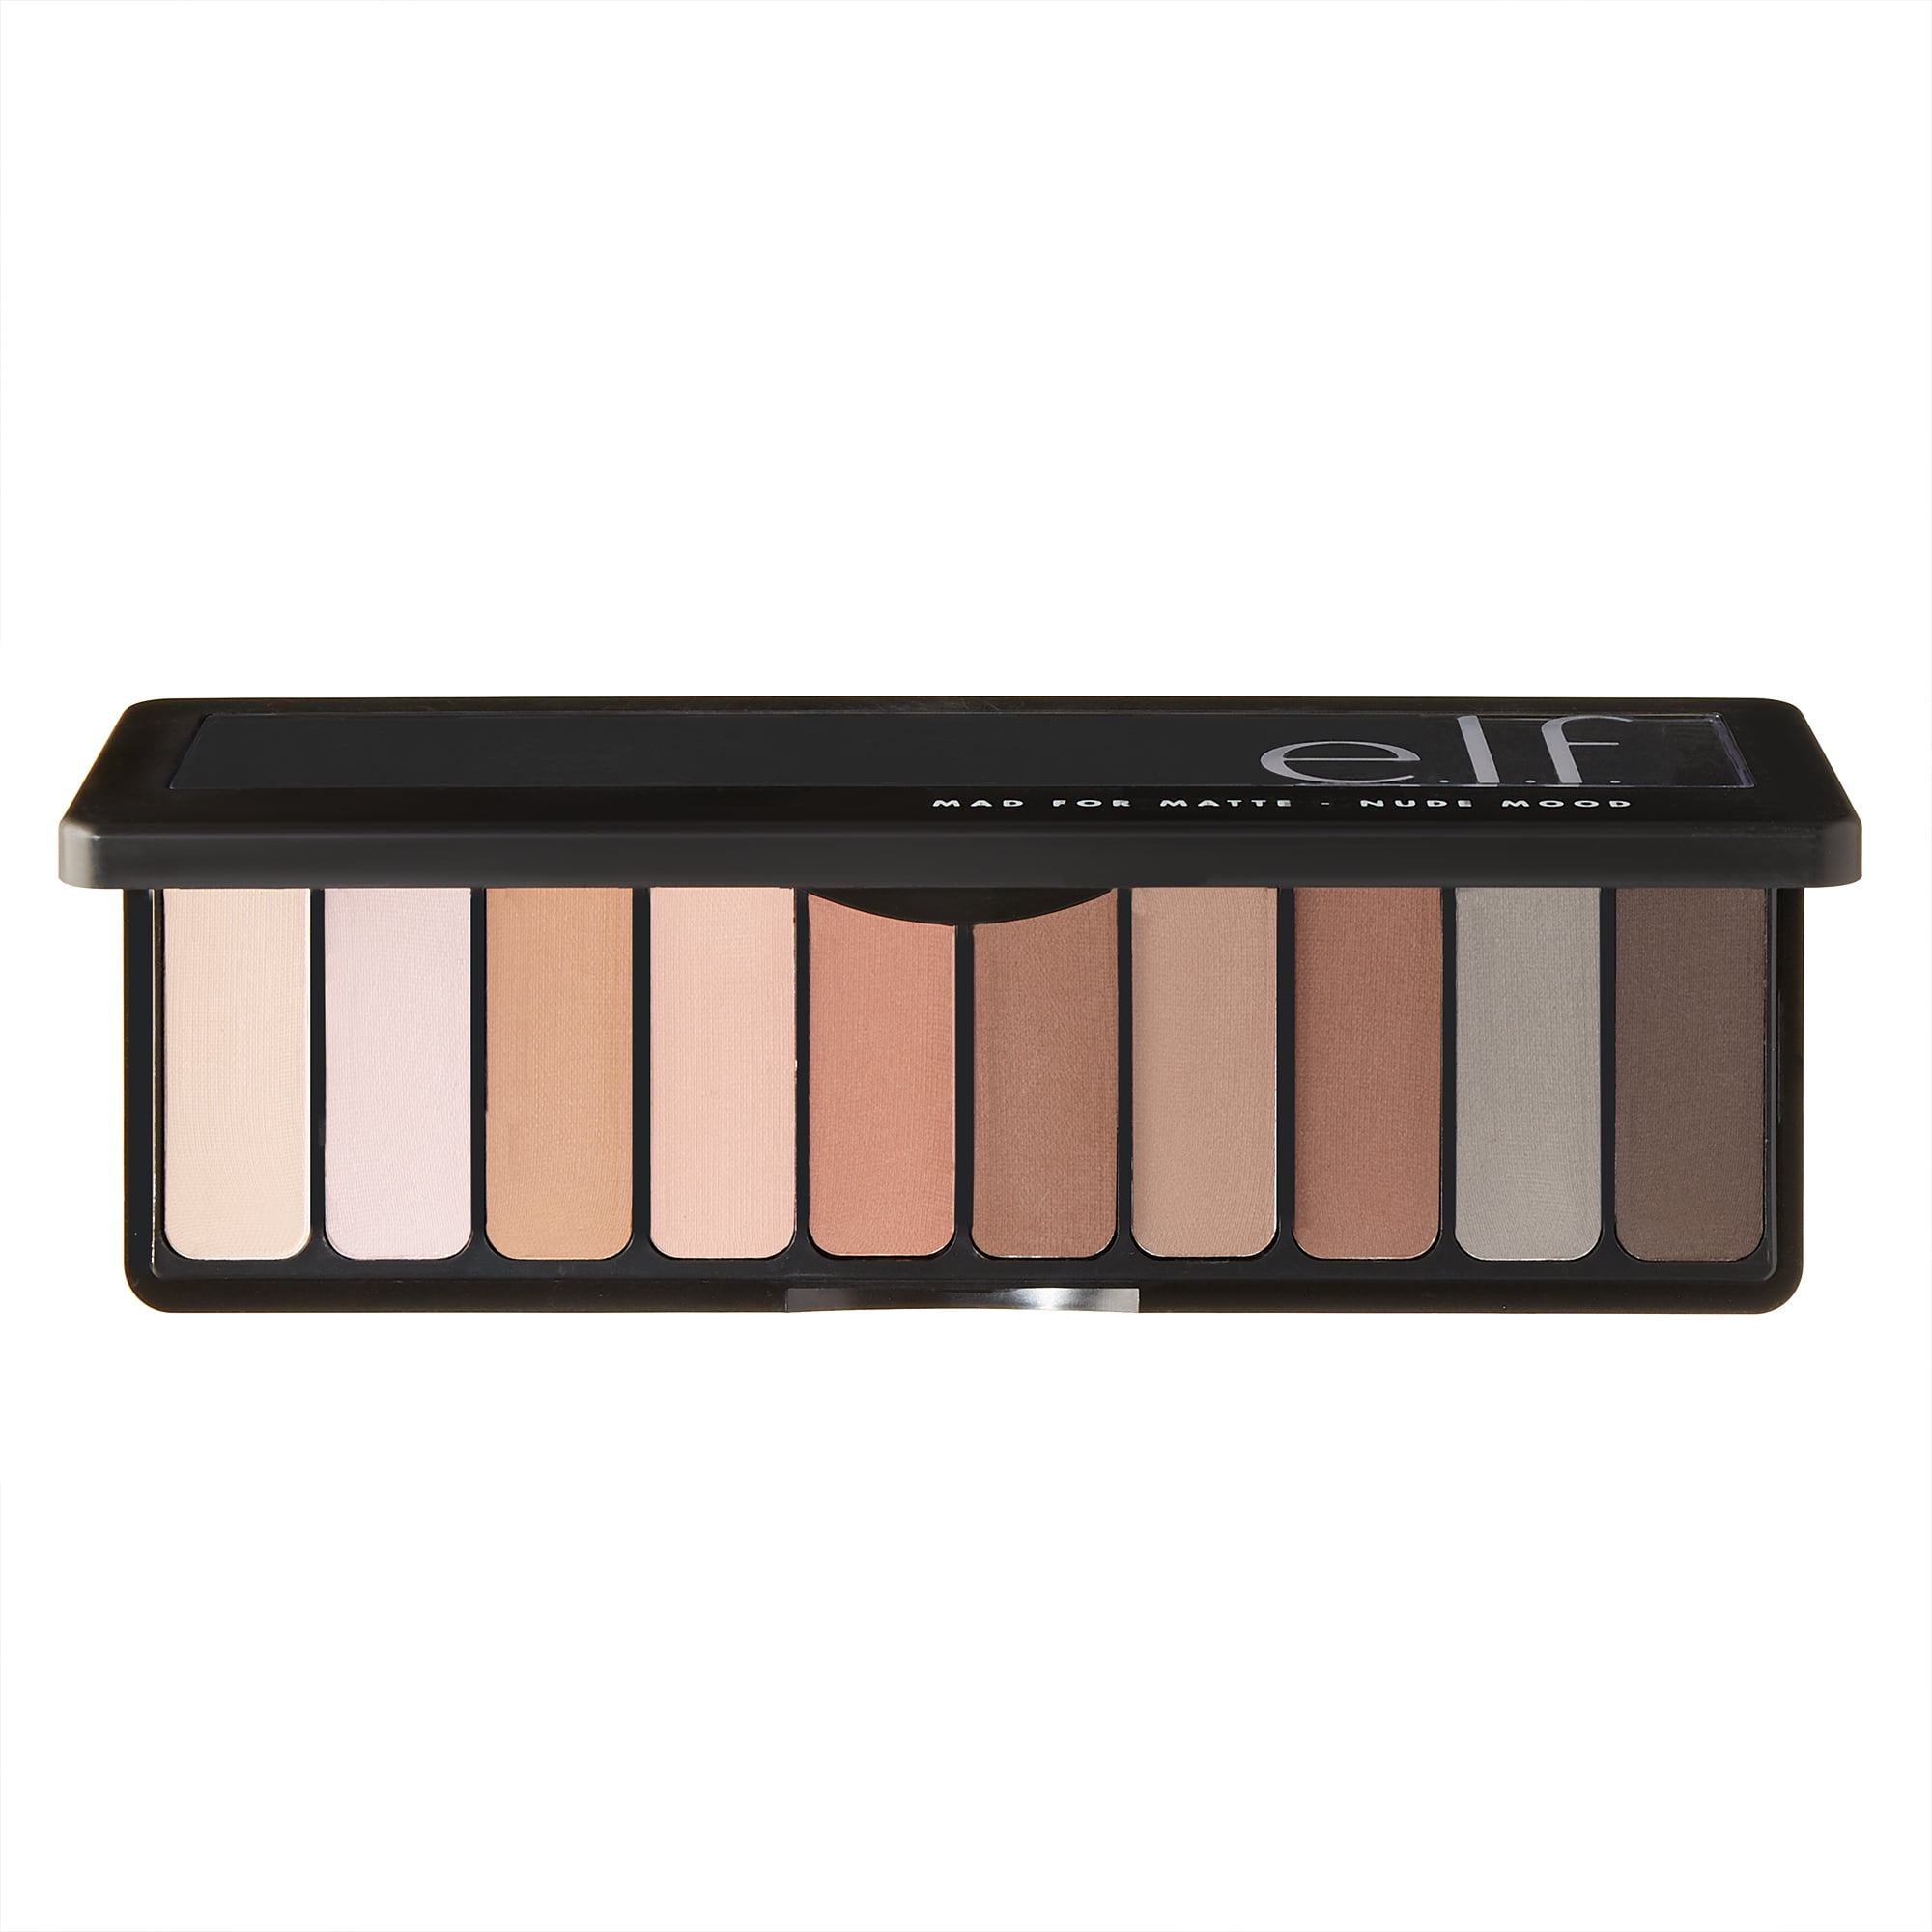 e.l.f. Cosmetics Mad for Matte Eyeshadow Palette - Nude Mood